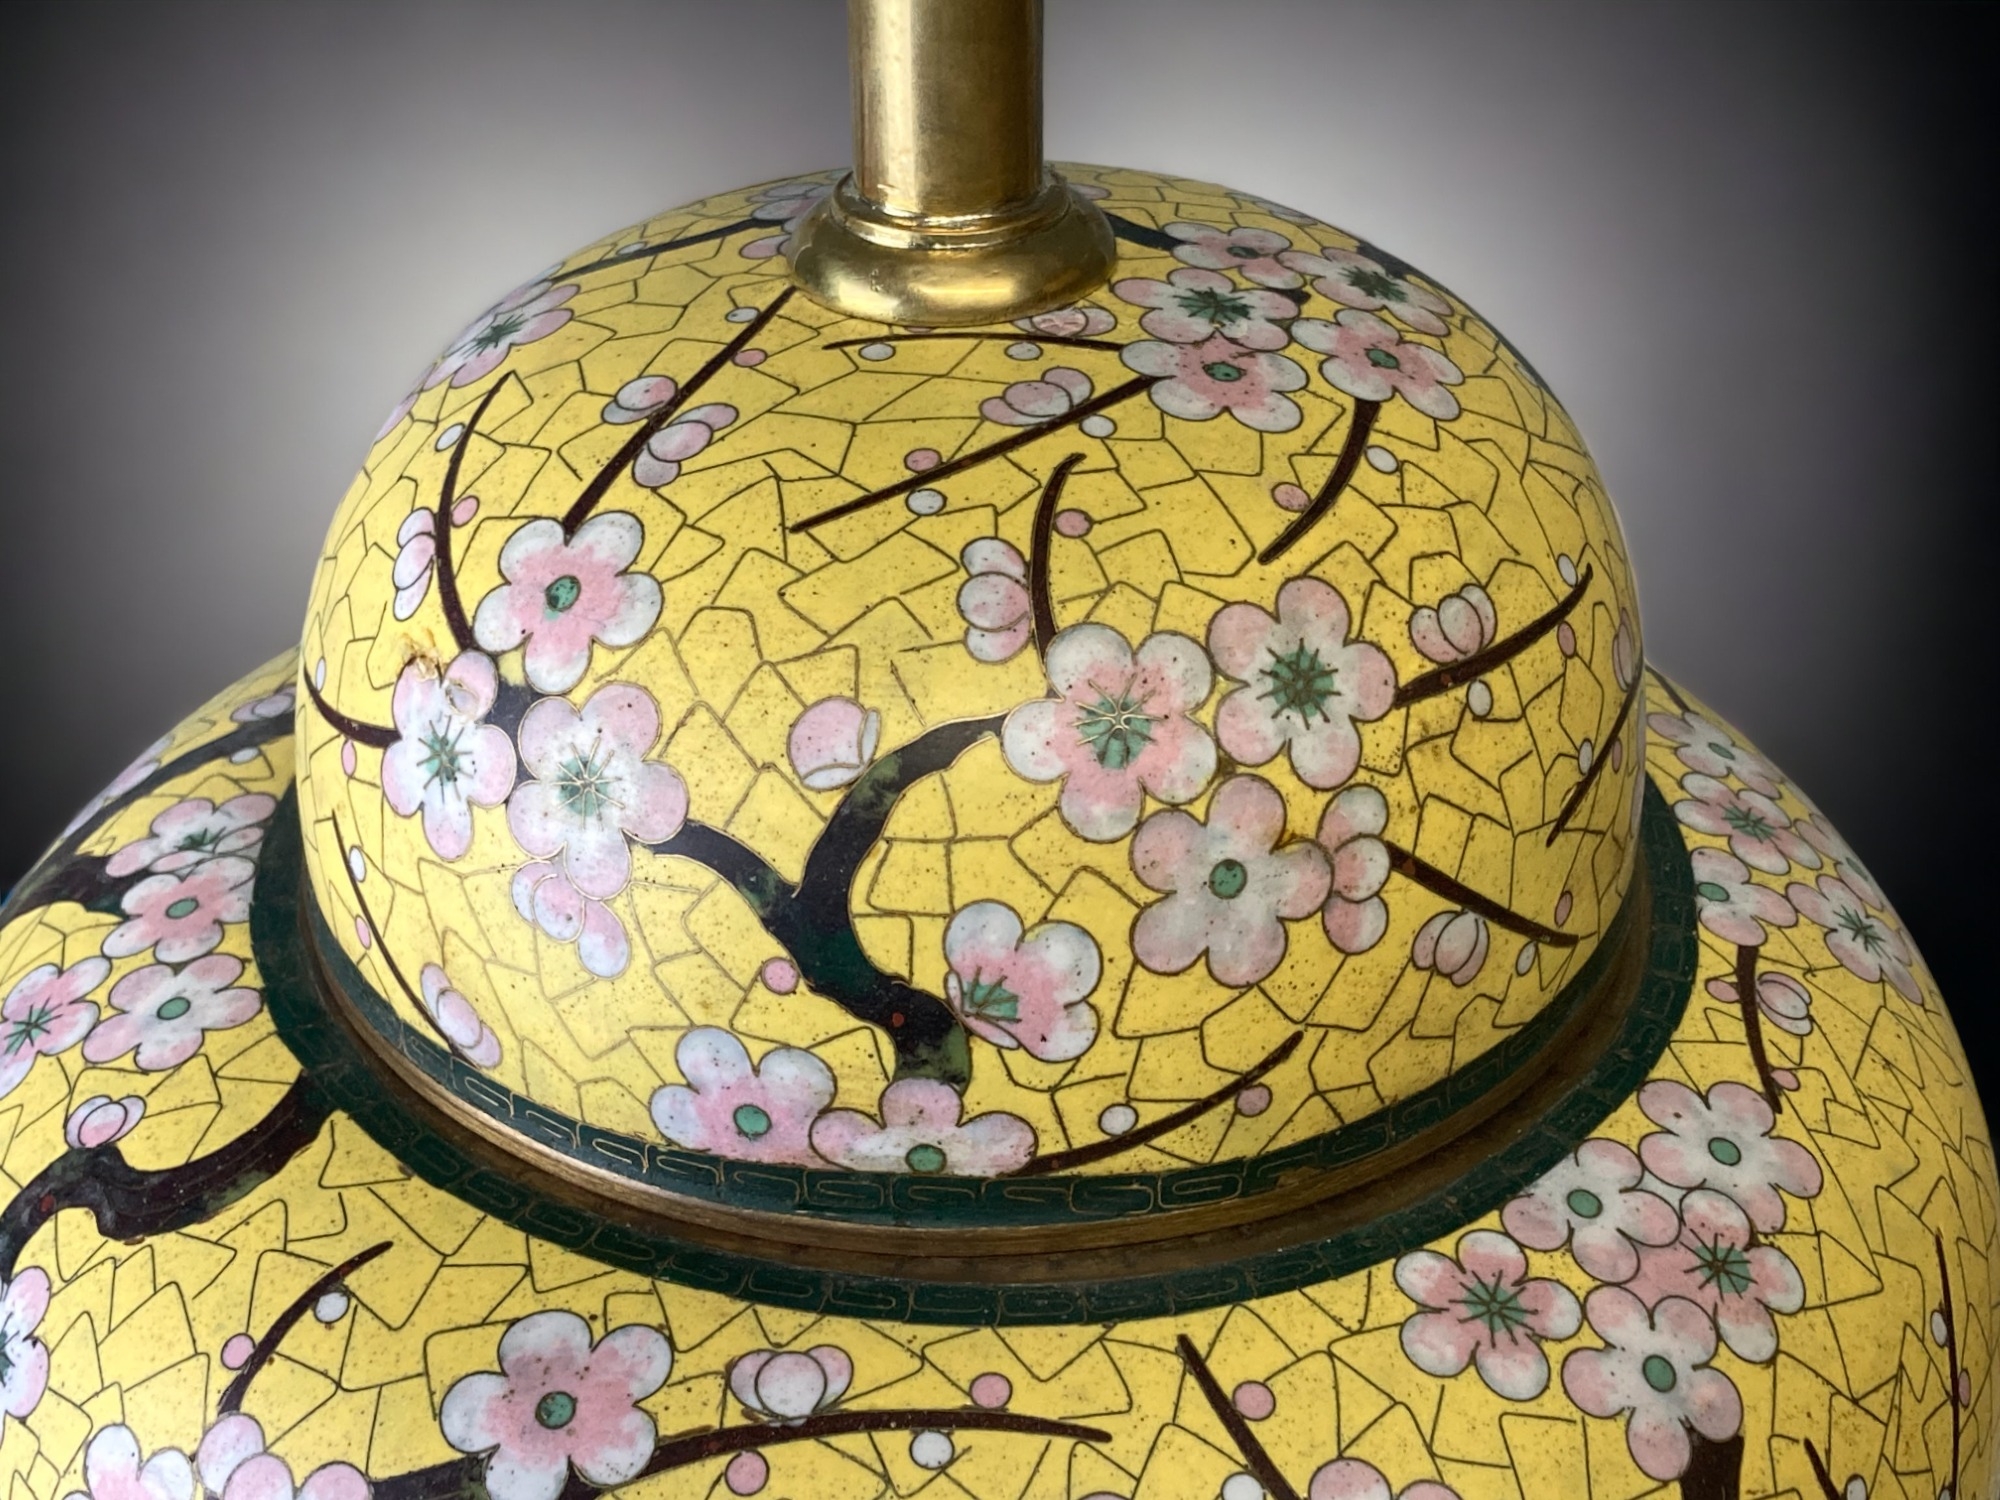 A LARGE CHINESE CLOISONNE JAR & COVER, CONVERTED TO TABLE LAMP. LATE QING DYNASTY. IMPERIAL YELLOW - Image 4 of 7